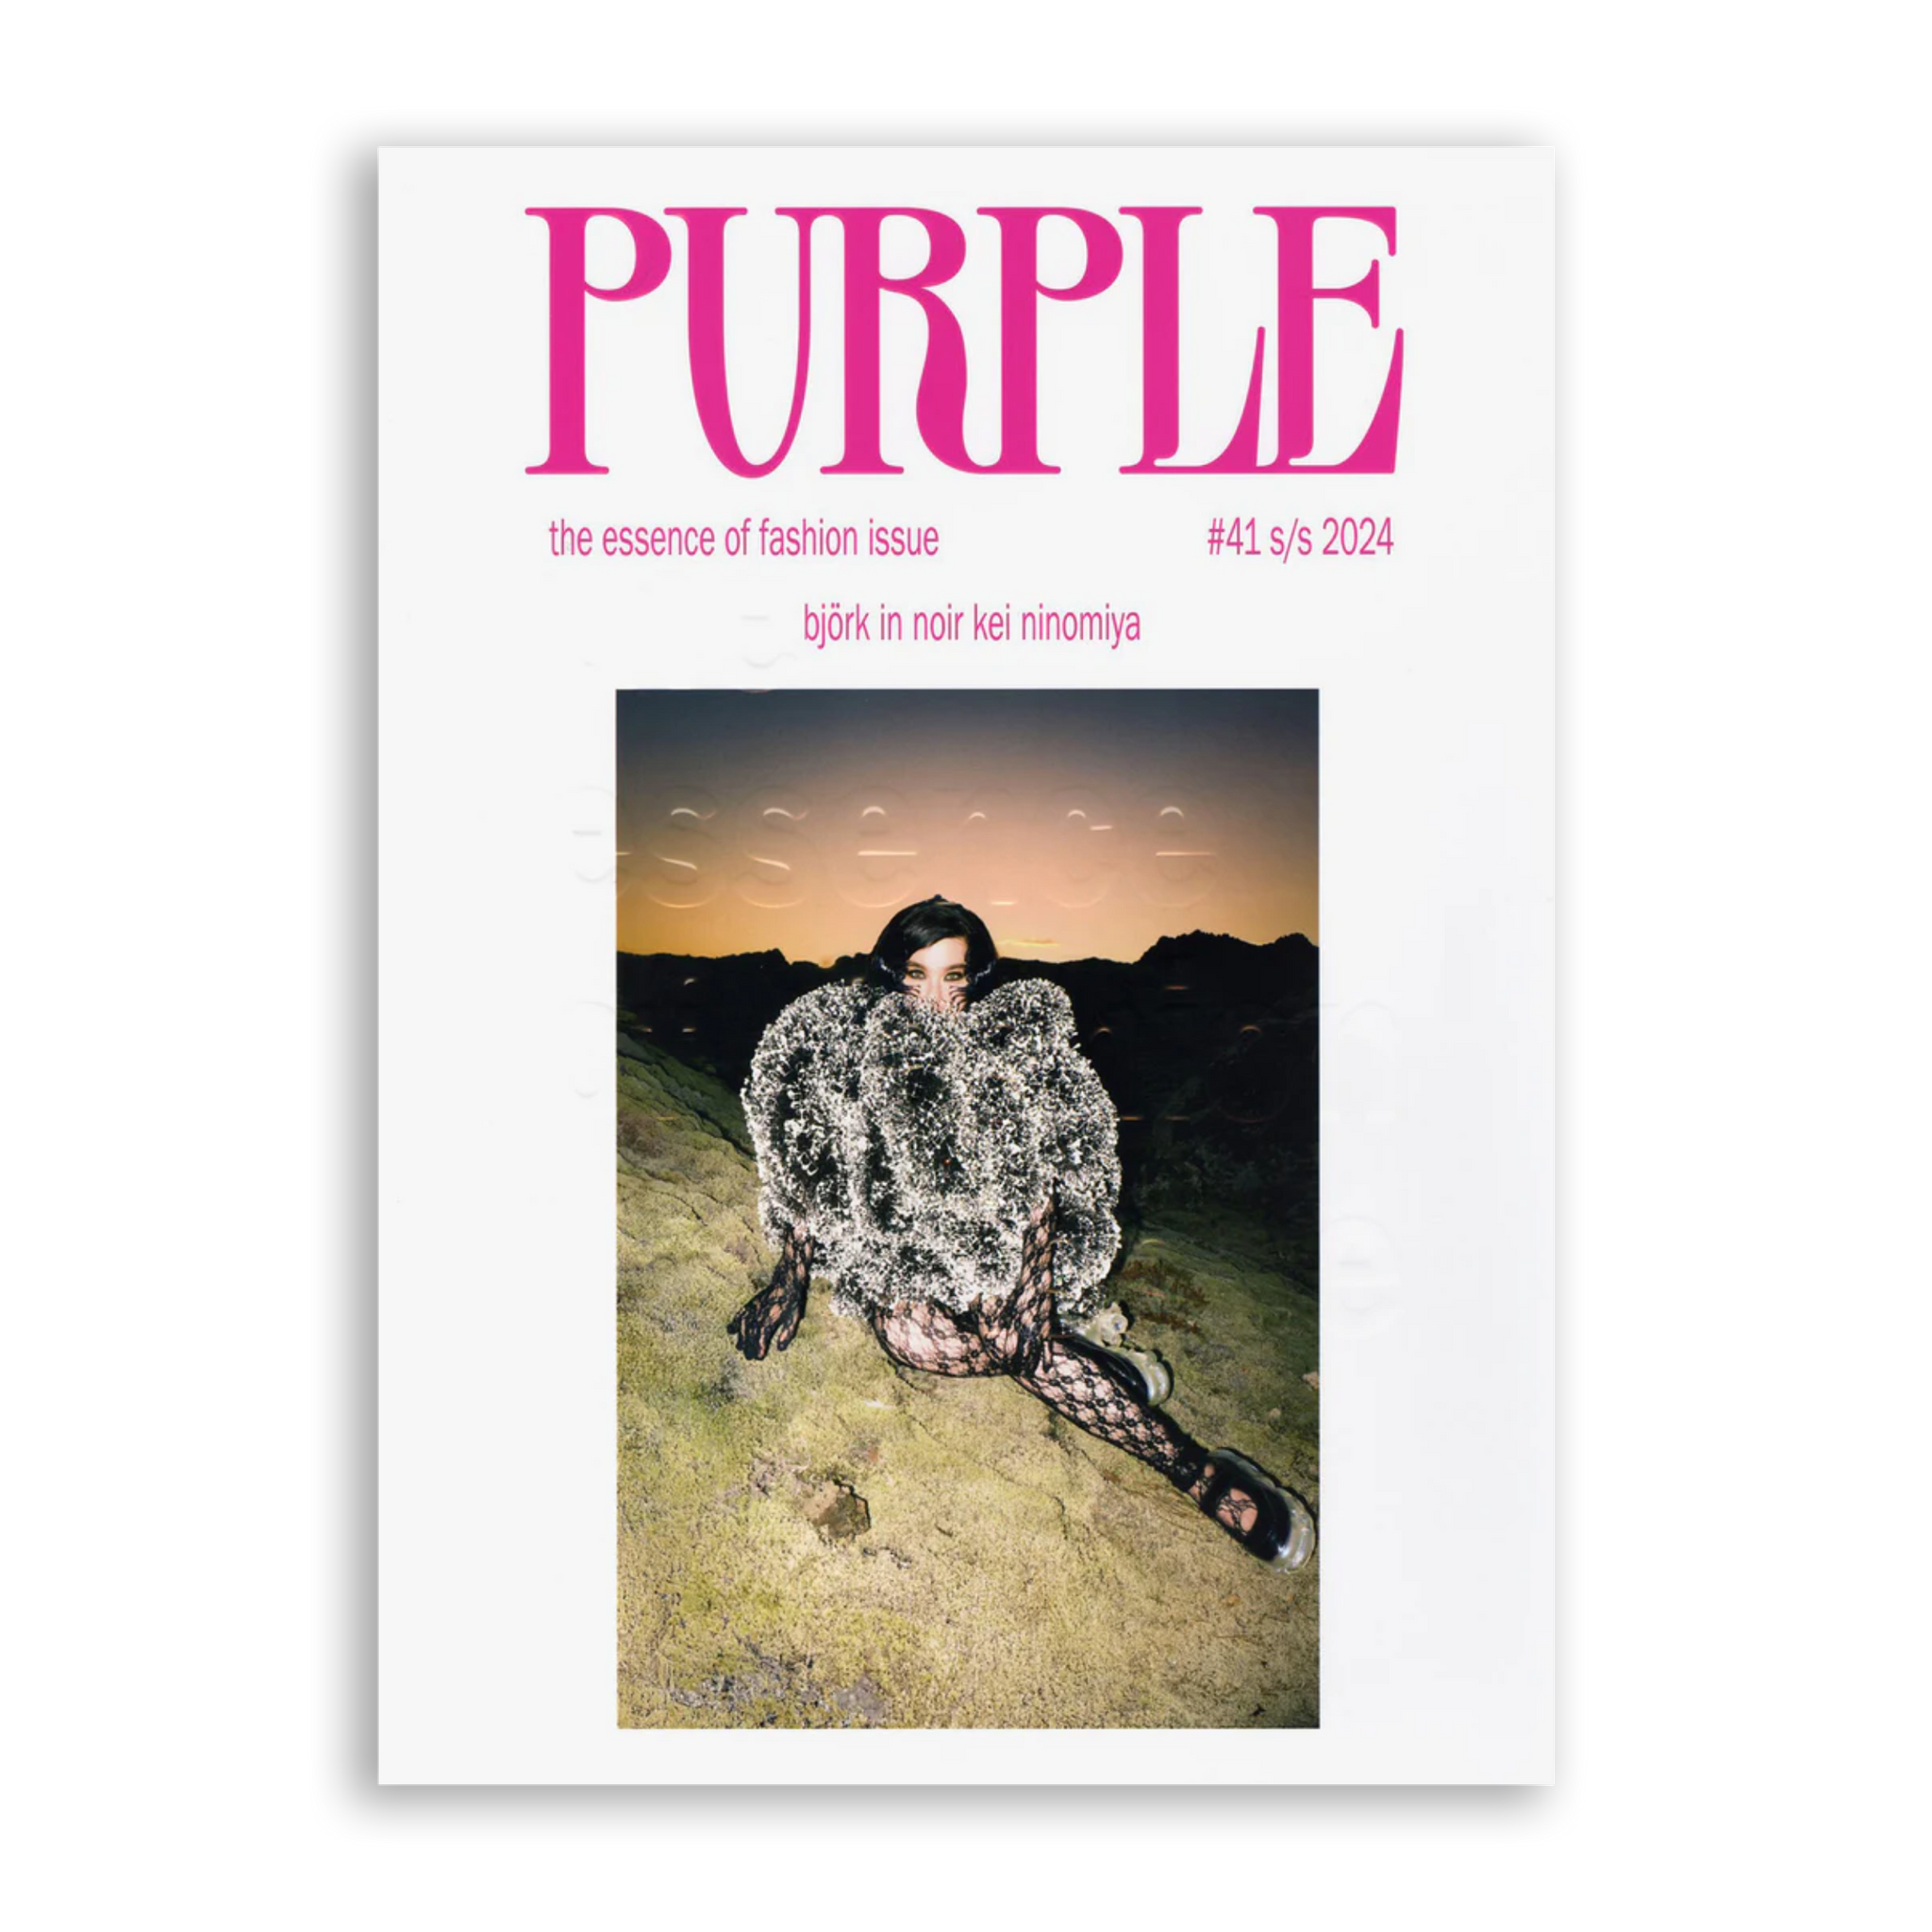 PURPLE #41 THE ESSENCE OF FASHION ISSUE